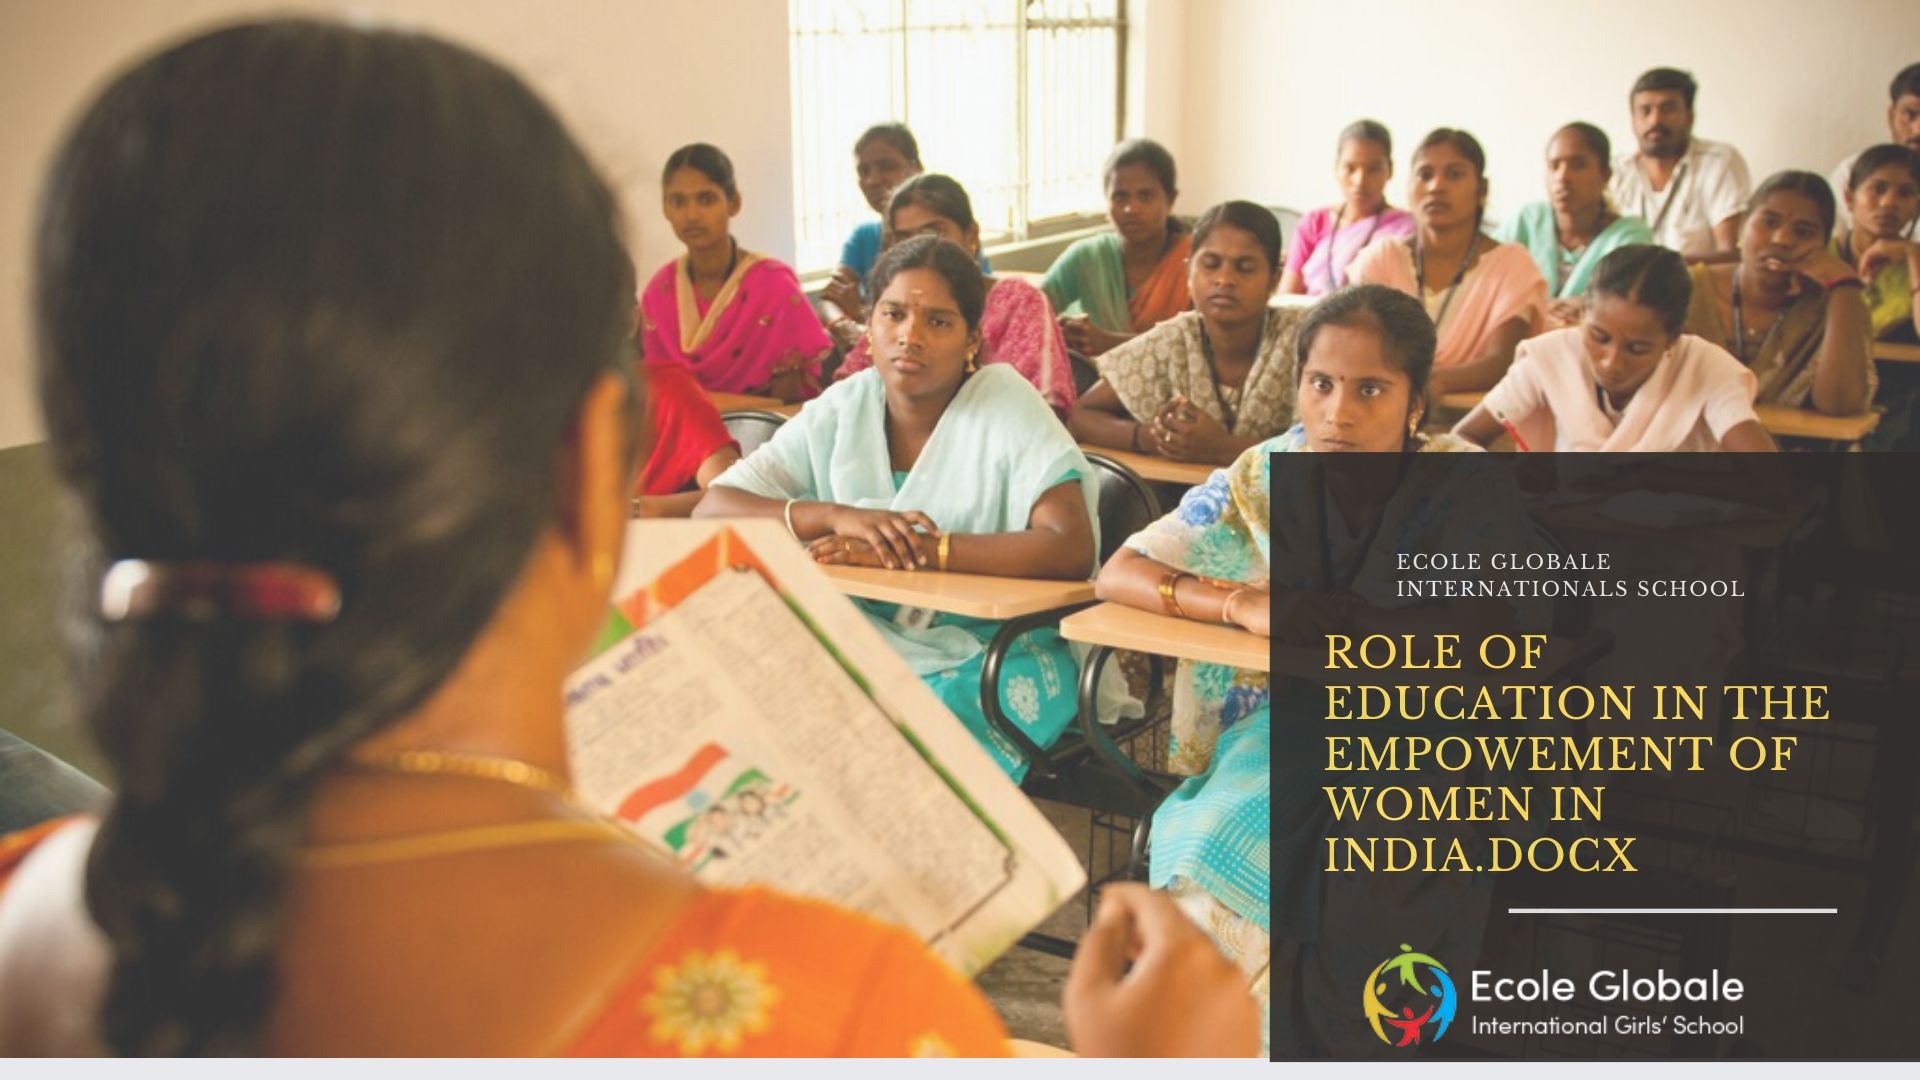 what is the role of education in women's empowerment